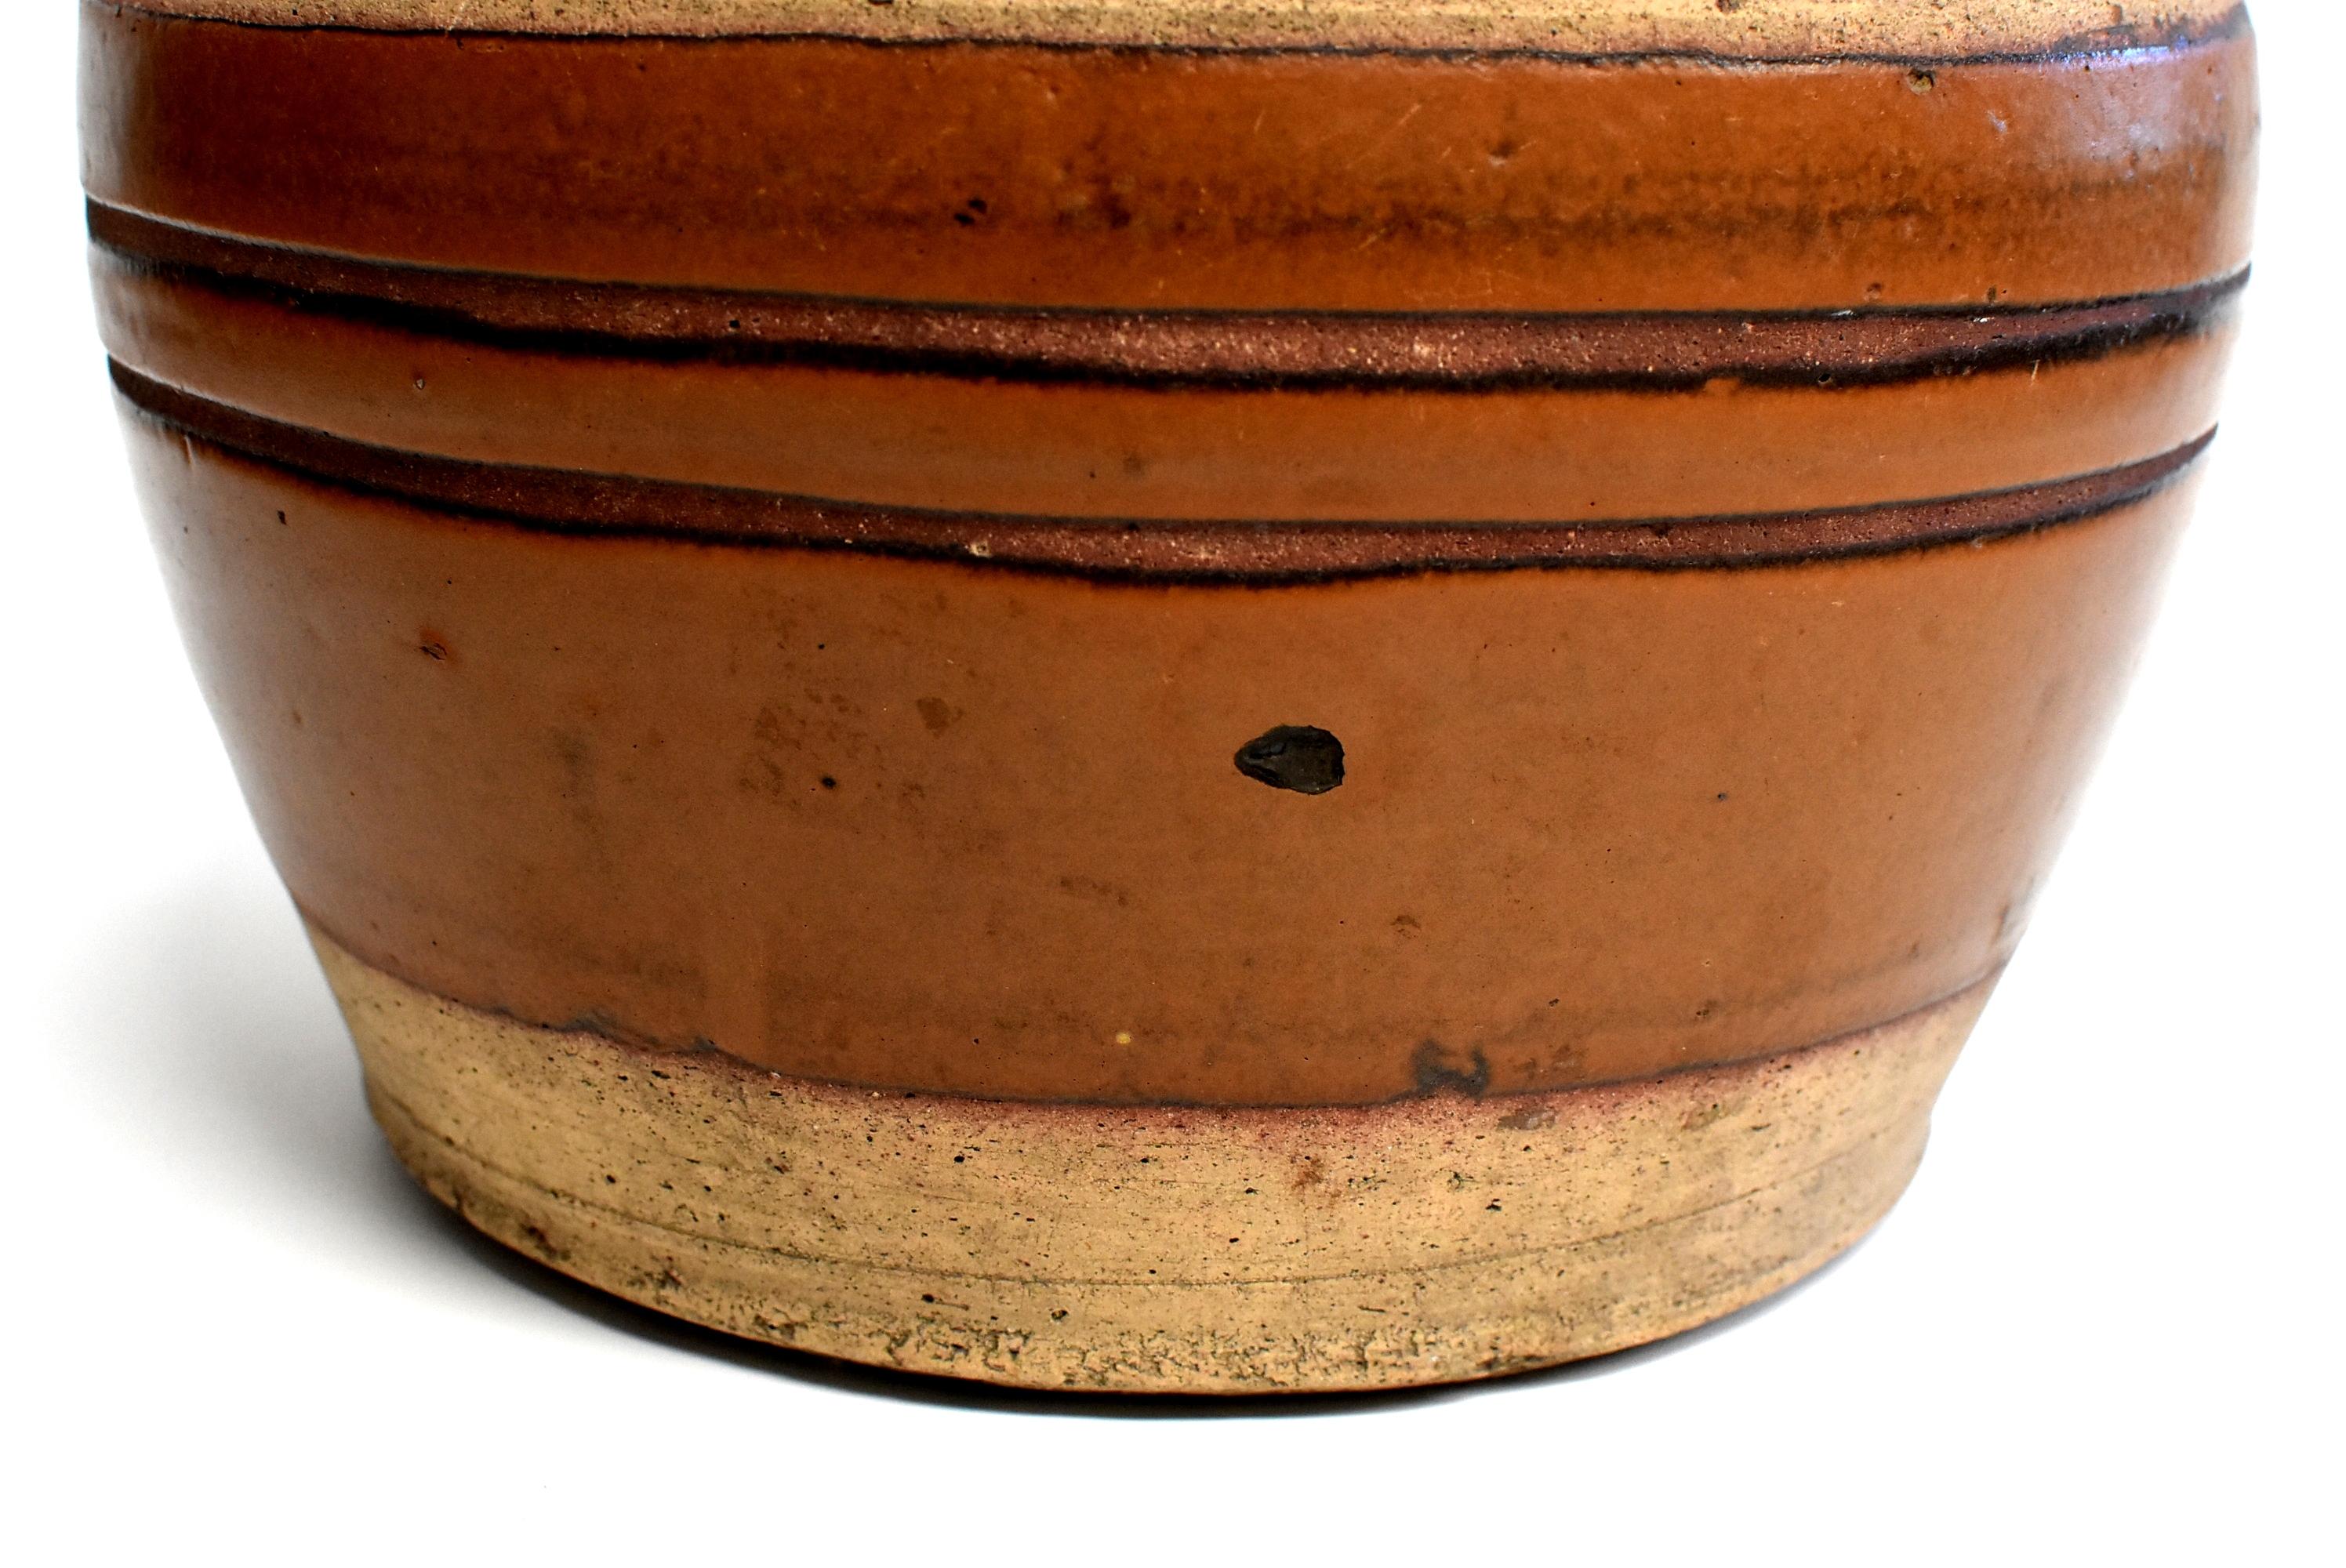 Large Antique Brown Jar with Black Rings, Handmade Chinese Pottery 12